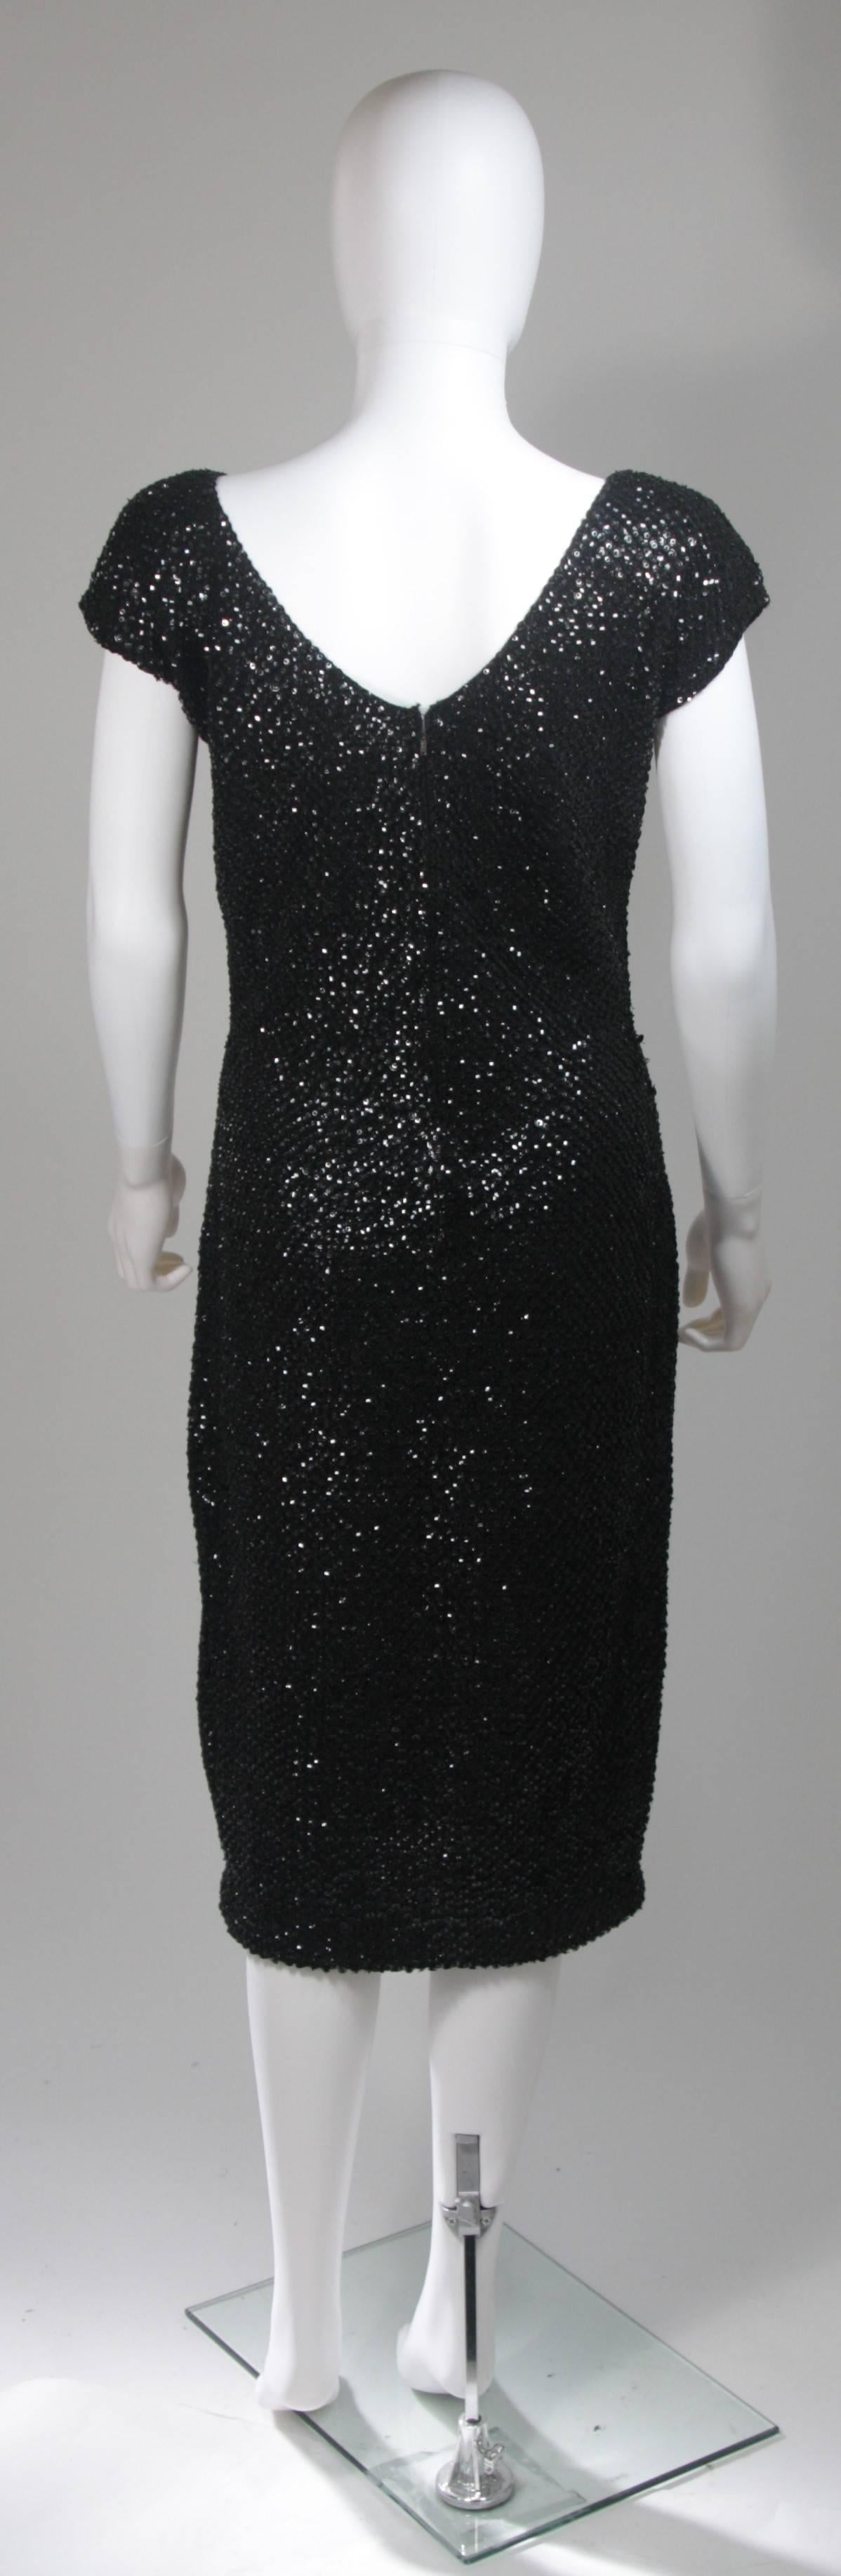 Gene Shelly Black Knit Wool Cocktail Dress with Sequin Embellishment  For Sale 4